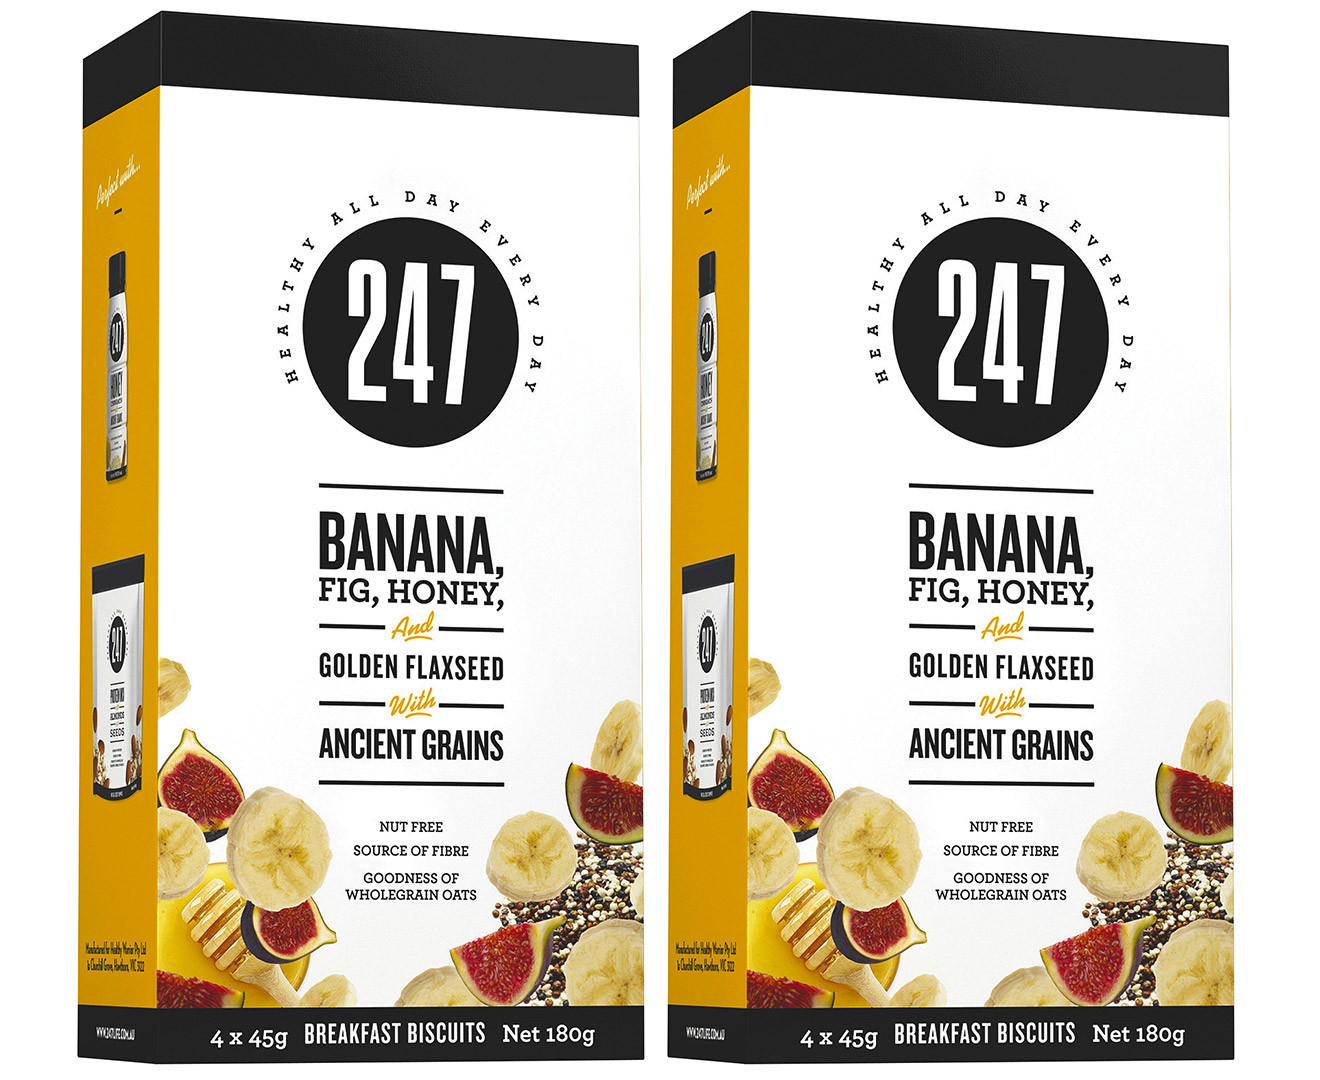 2 X 247 Breakfast Biscuits Banana Fig Honey And Golden Flaxseed W